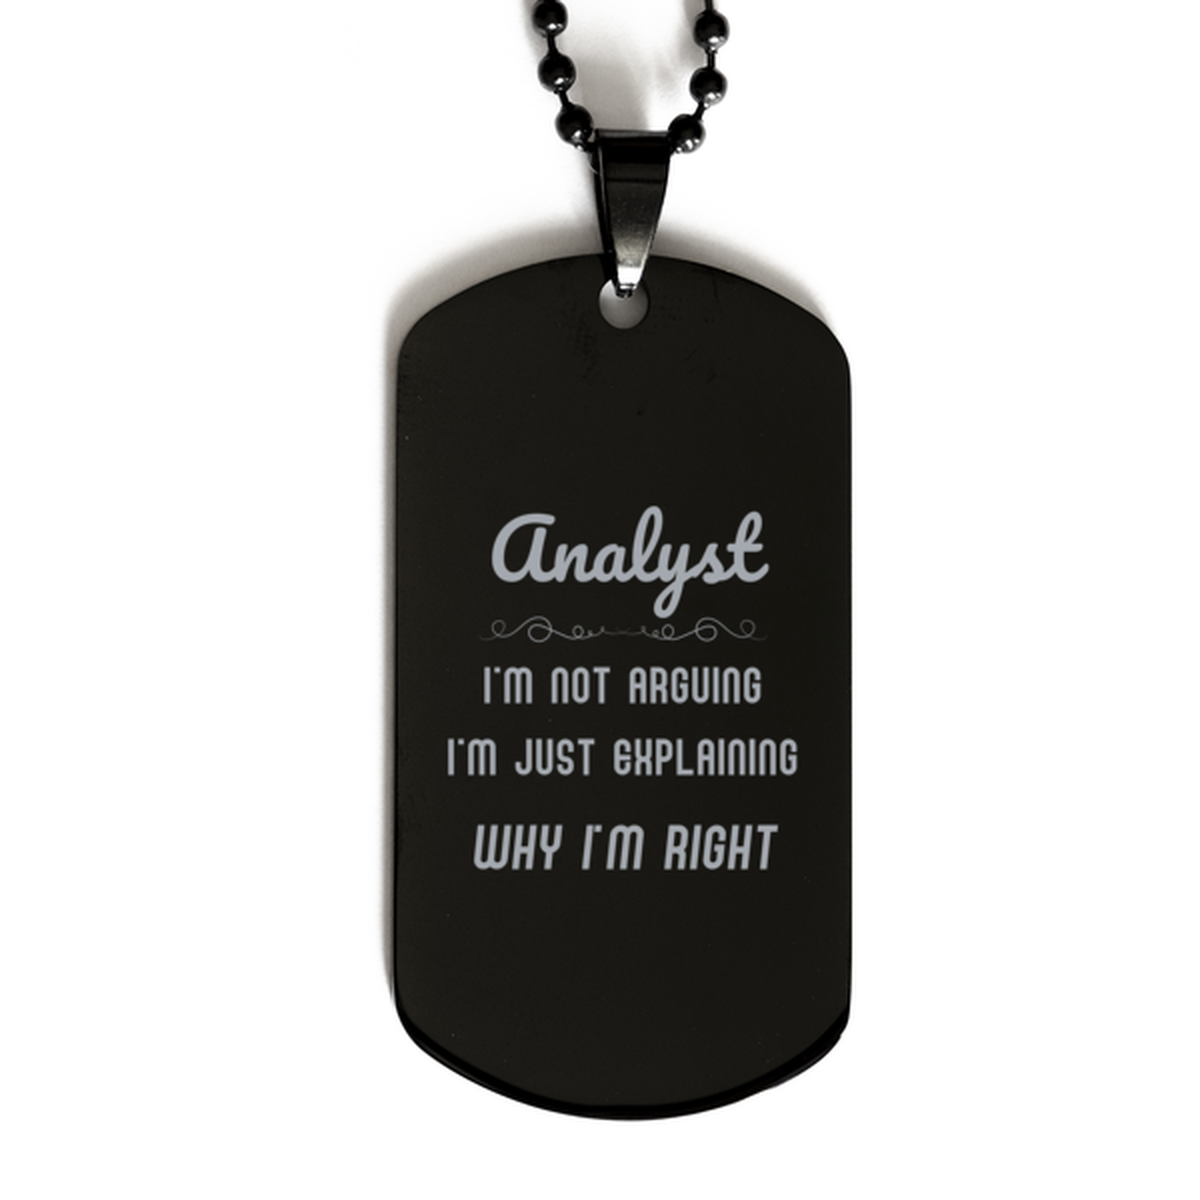 Analyst I'm not Arguing. I'm Just Explaining Why I'm RIGHT Black Dog Tag, Funny Saying Quote Analyst Gifts For Analyst Graduation Birthday Christmas Gifts for Men Women Coworker